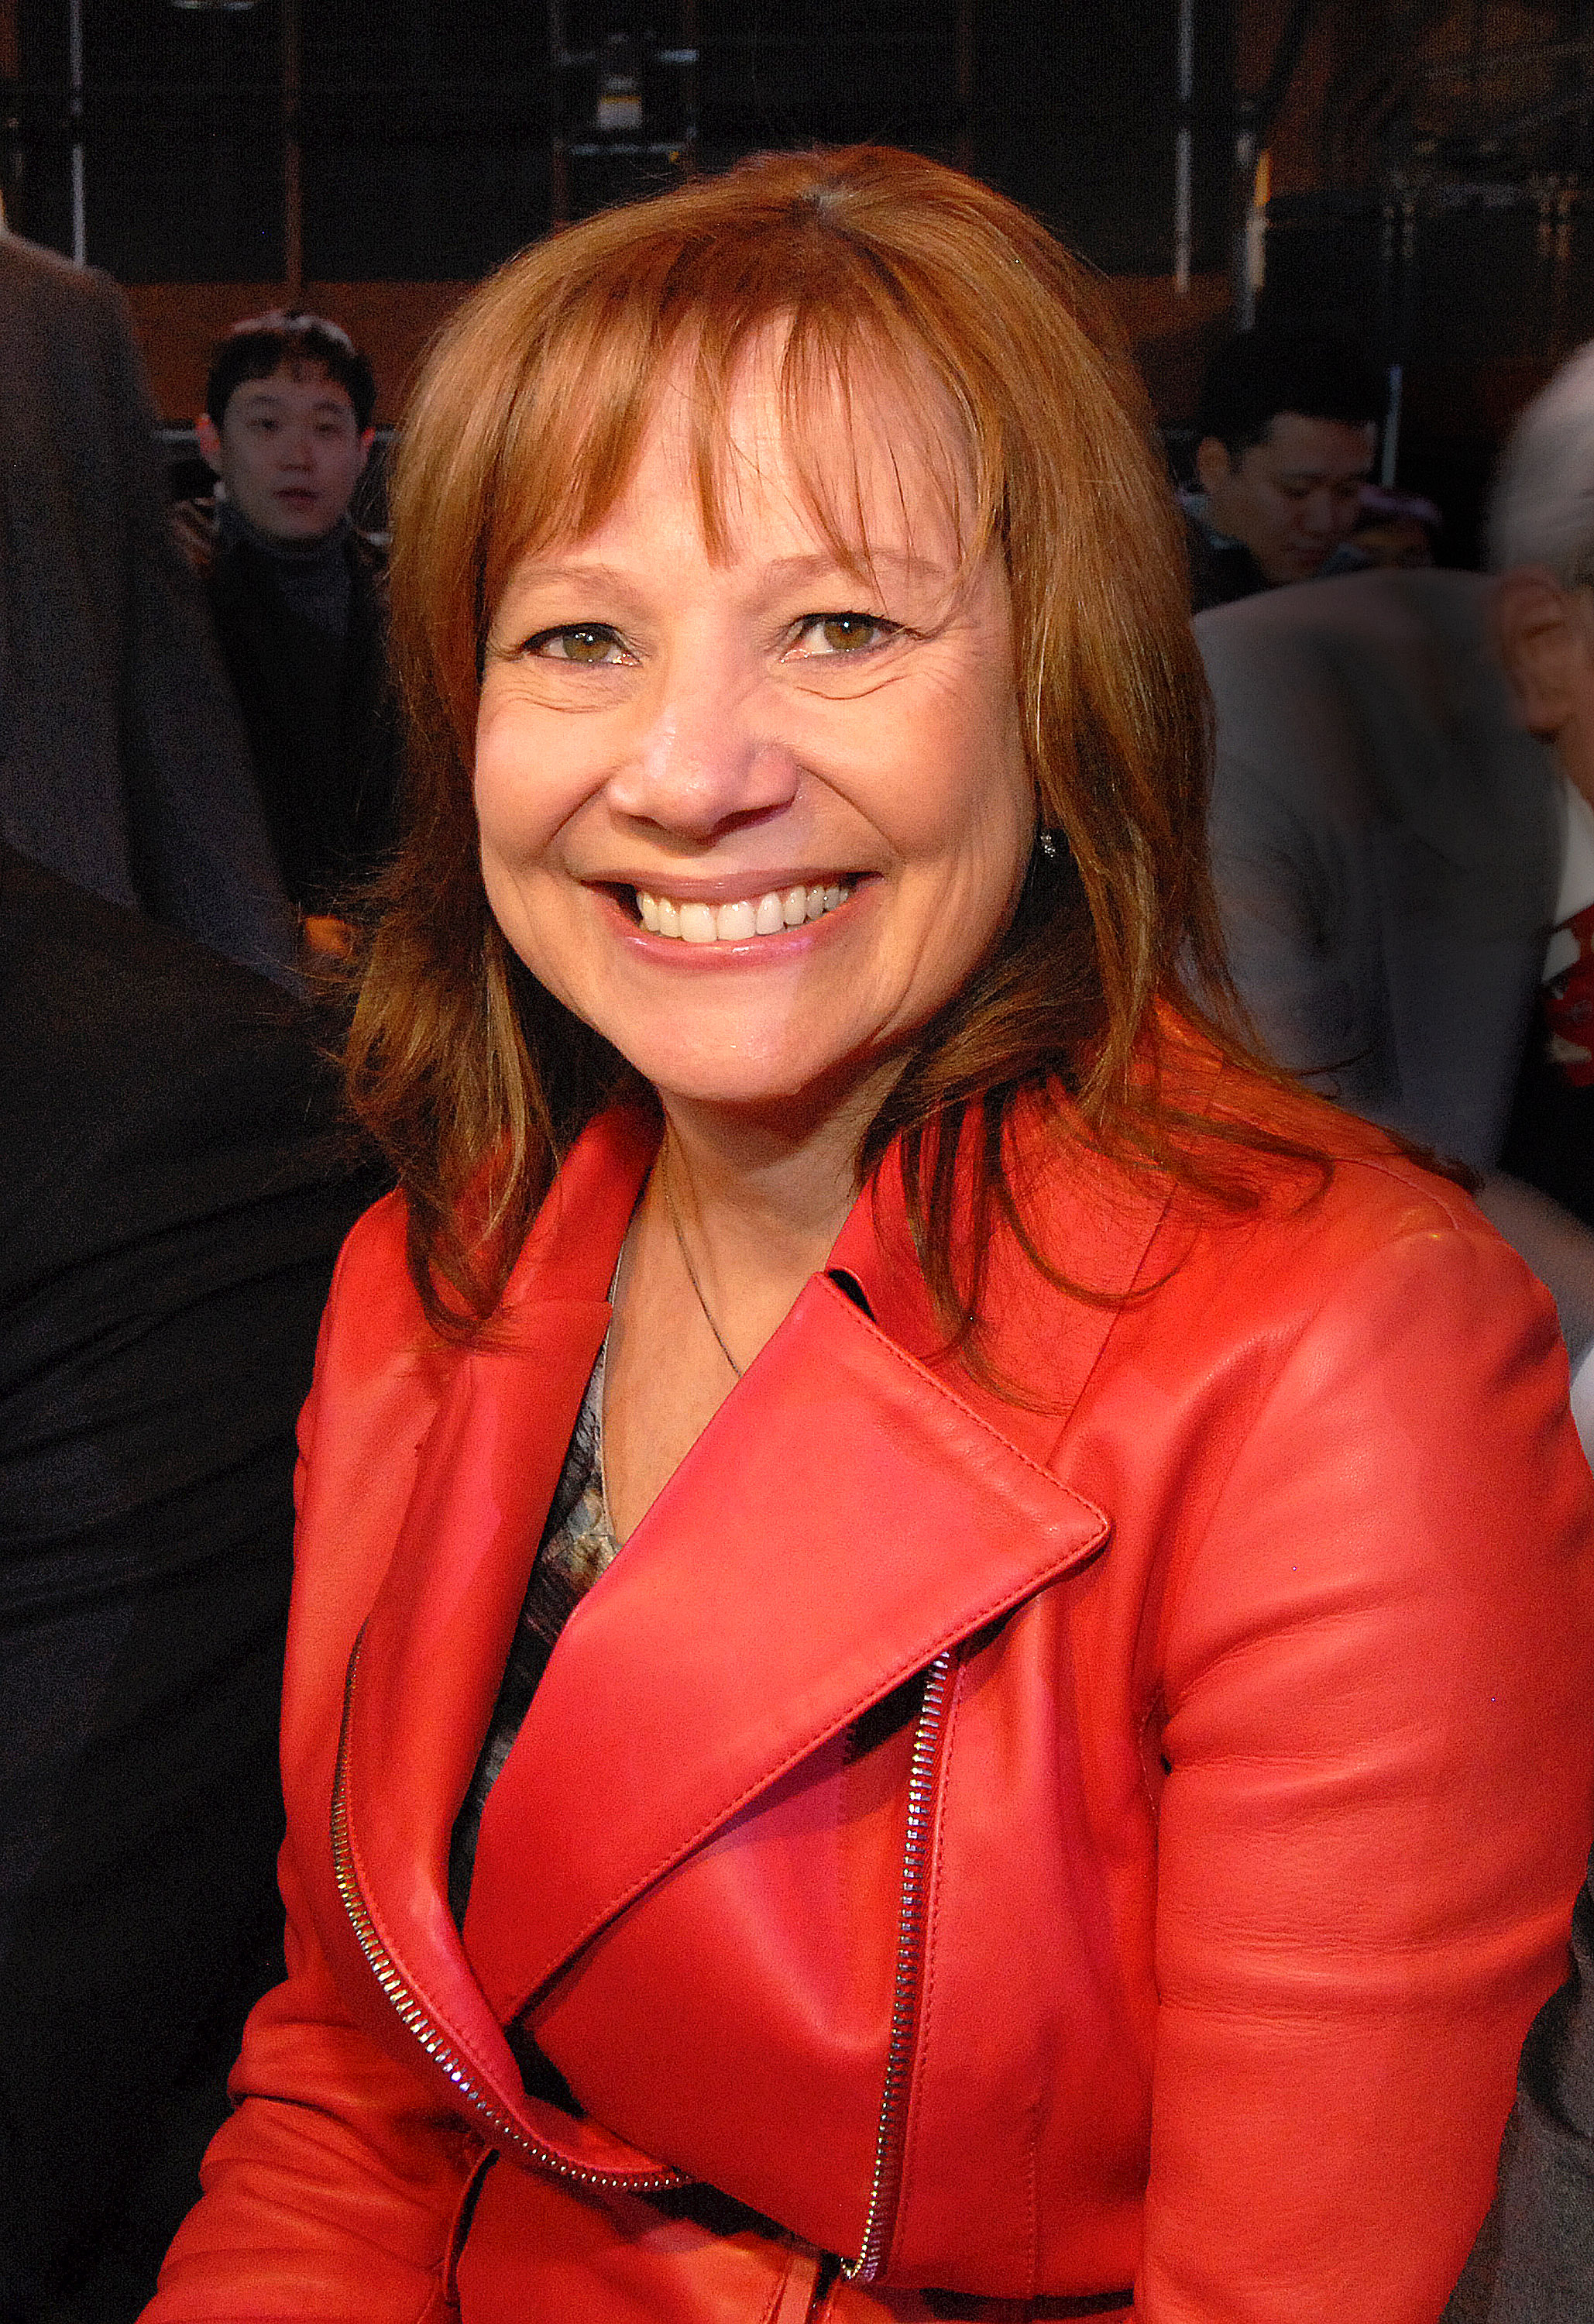 Mary Barra, CEO of General Motors, attends the Buick Avenir press conference on Jan. 11, 2015 in Detroit, Michigan.